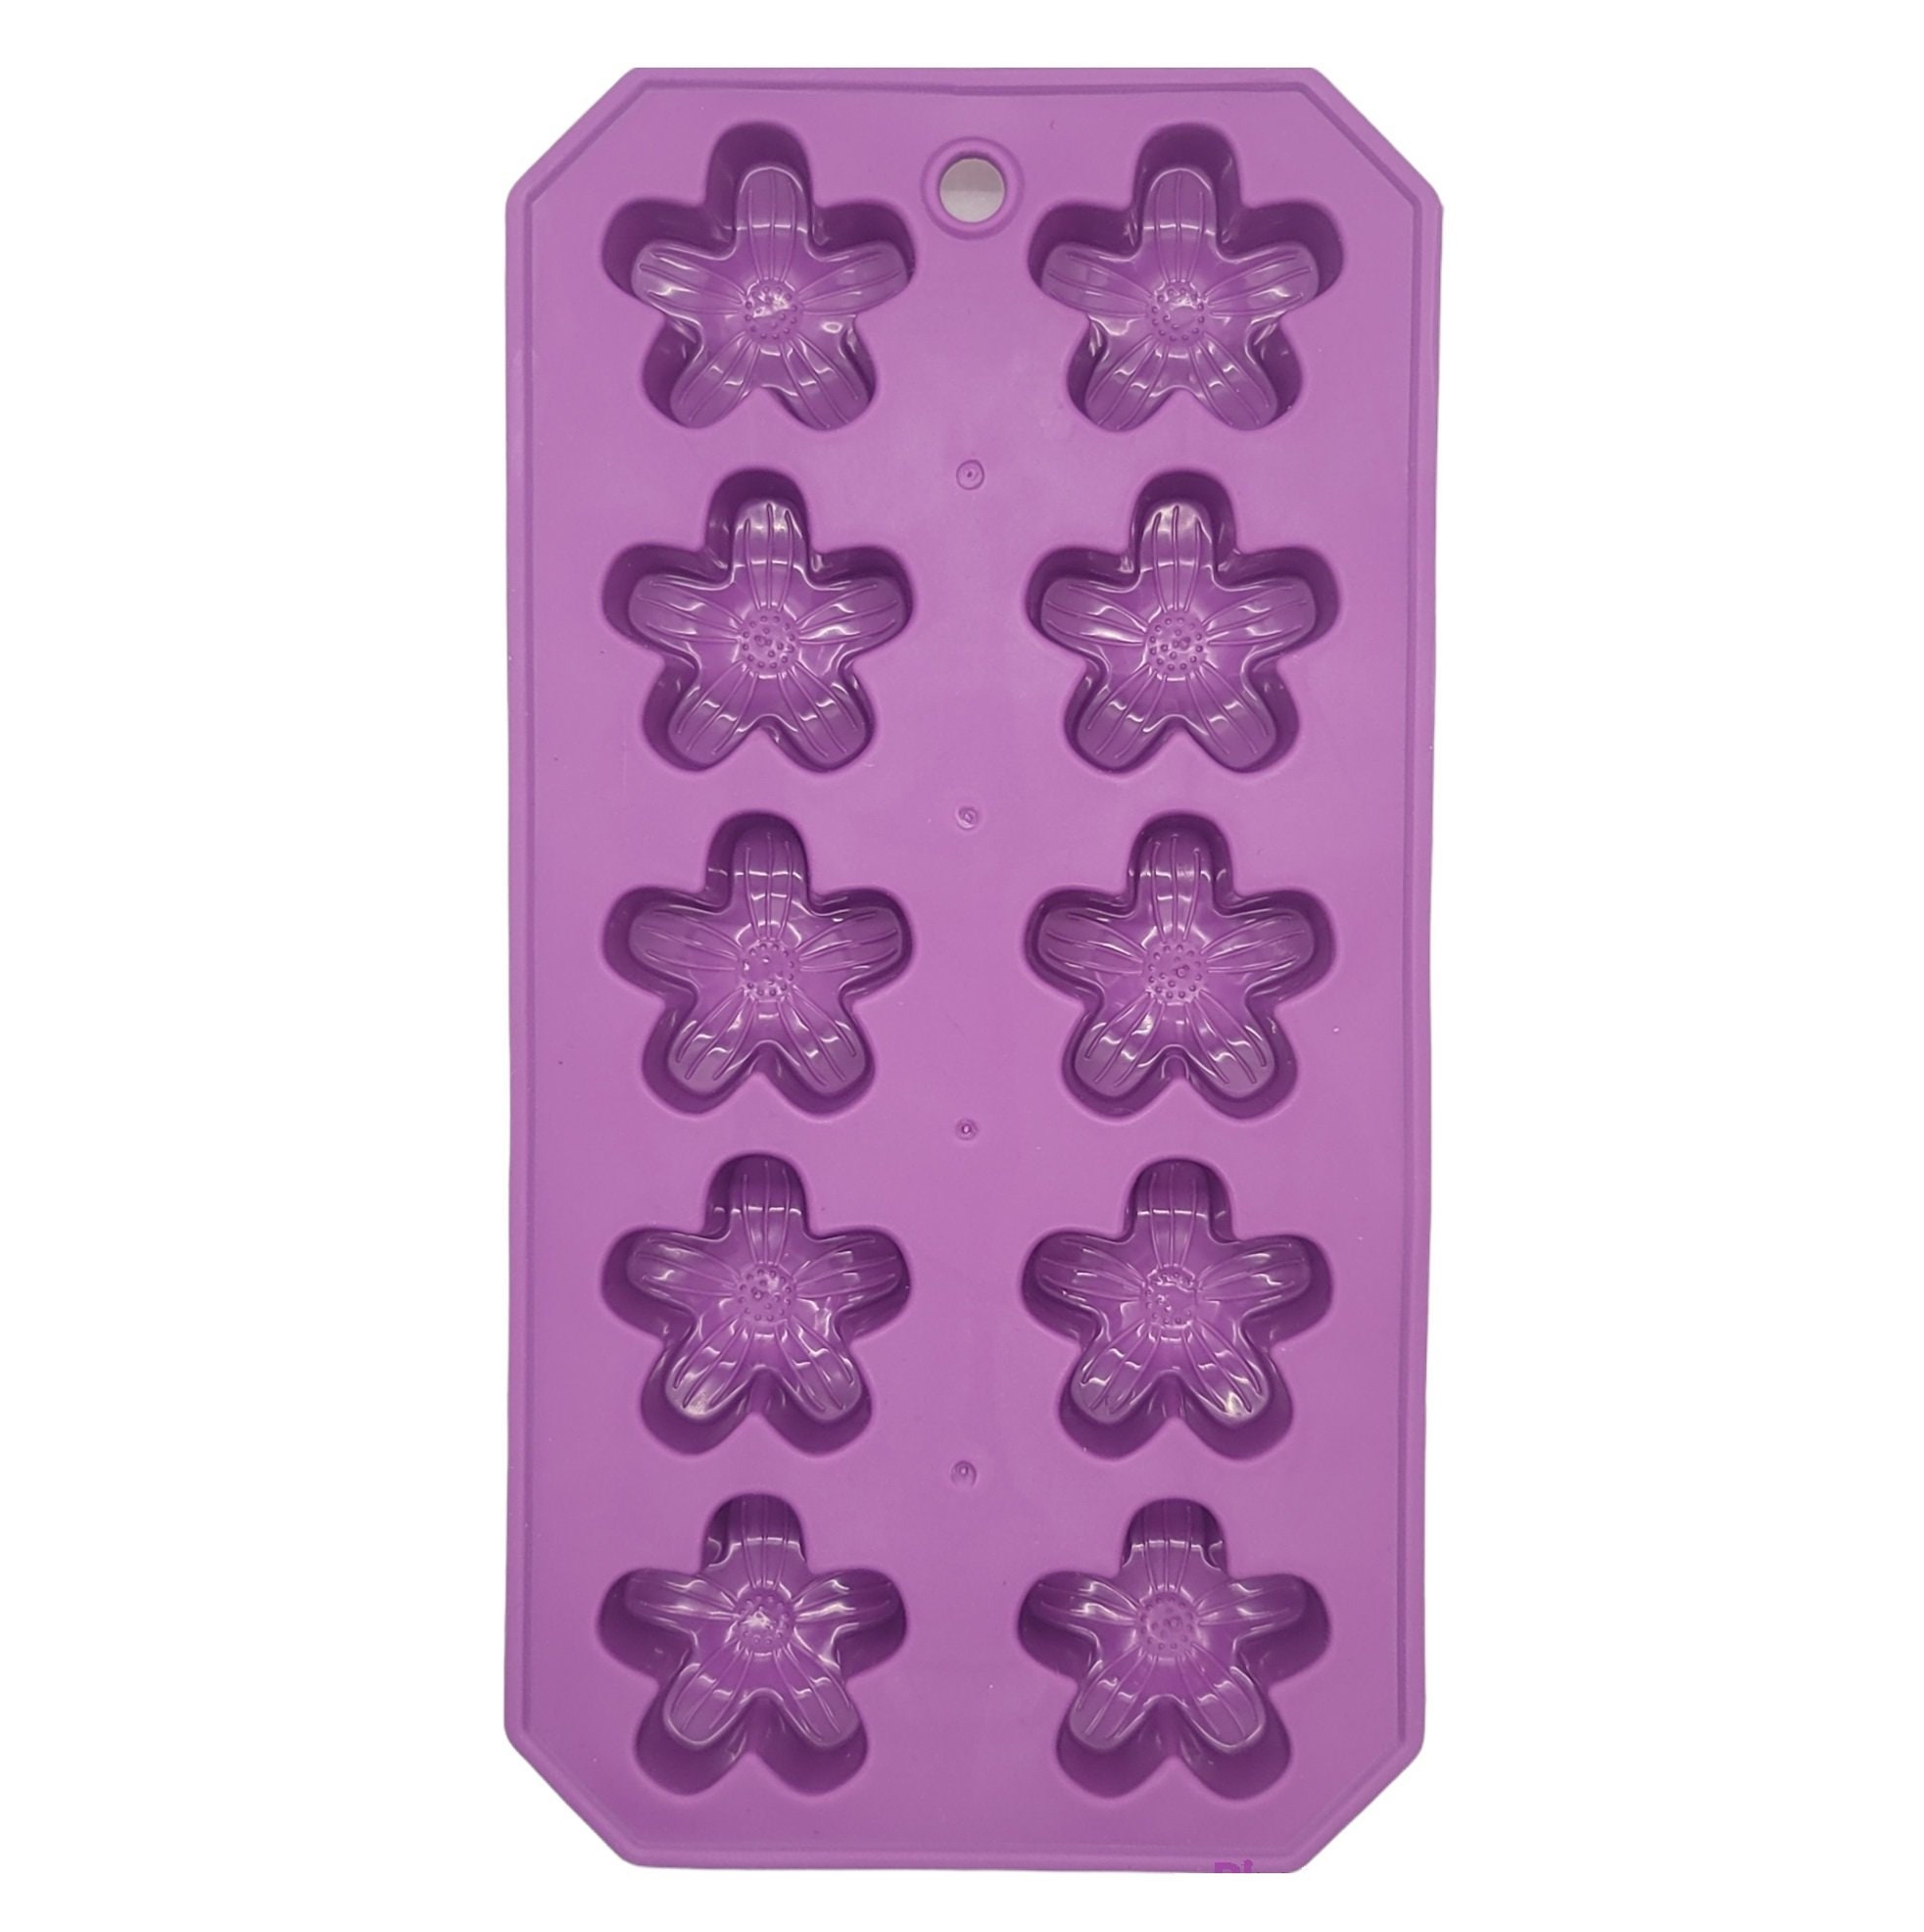 Handy Housewares 15 Rectangle Cube Flexible Silicone Bottom Push-Out Ice  Cube Tray